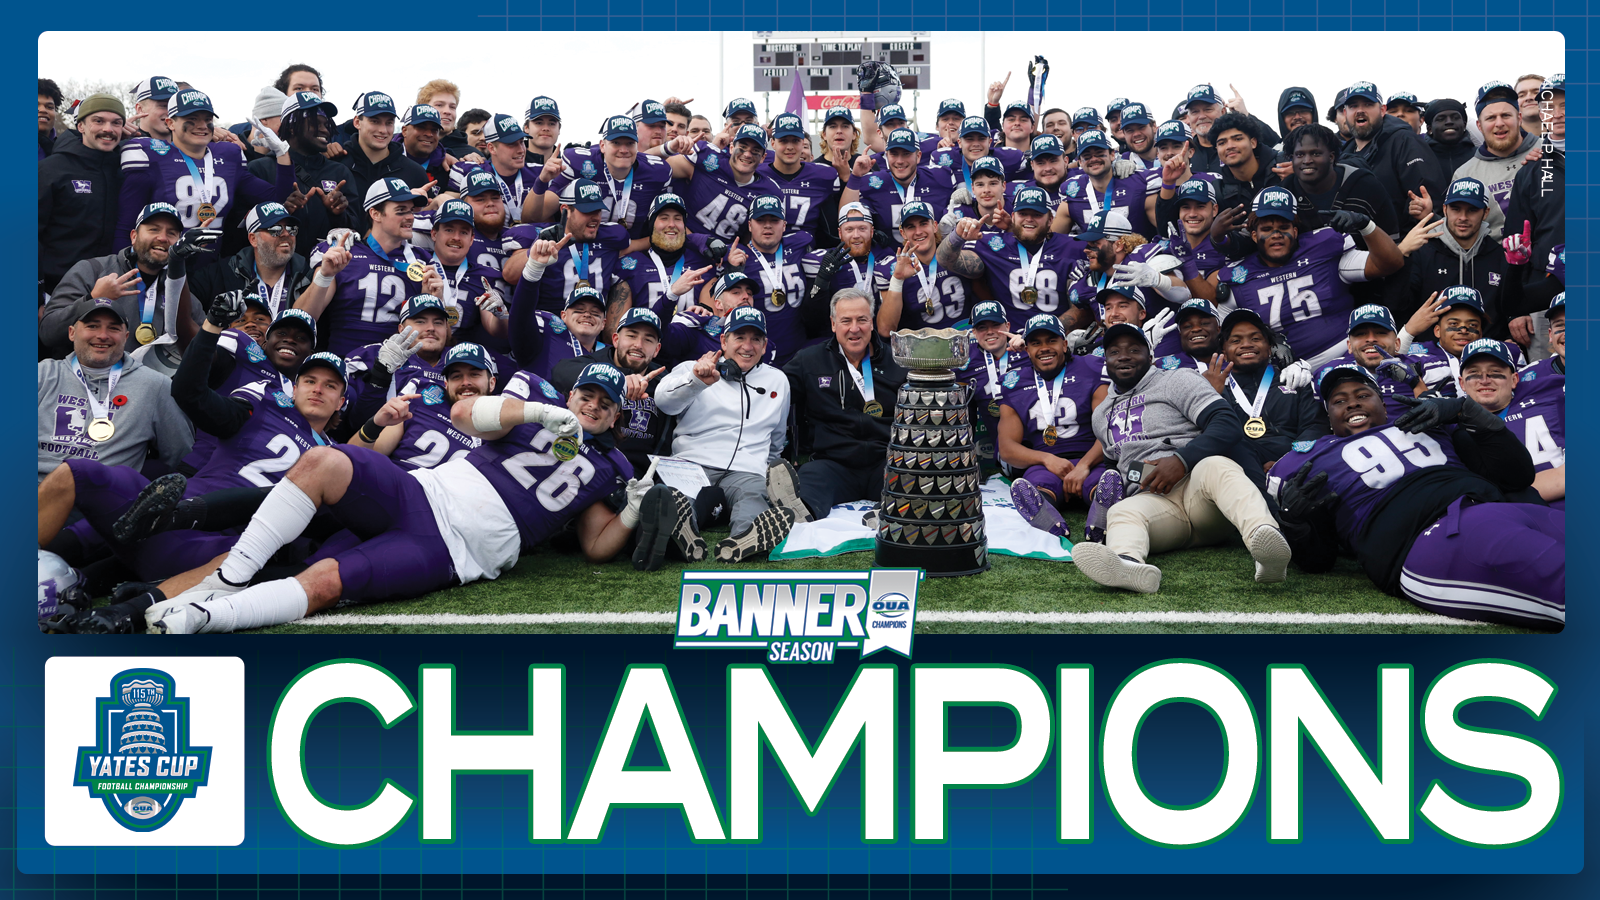 Graphic on predominantly blue background feature banner photo of Western football team, with large white text that reads 'Champions' and the OUA 115th Yates Cup Championship logo underneath them